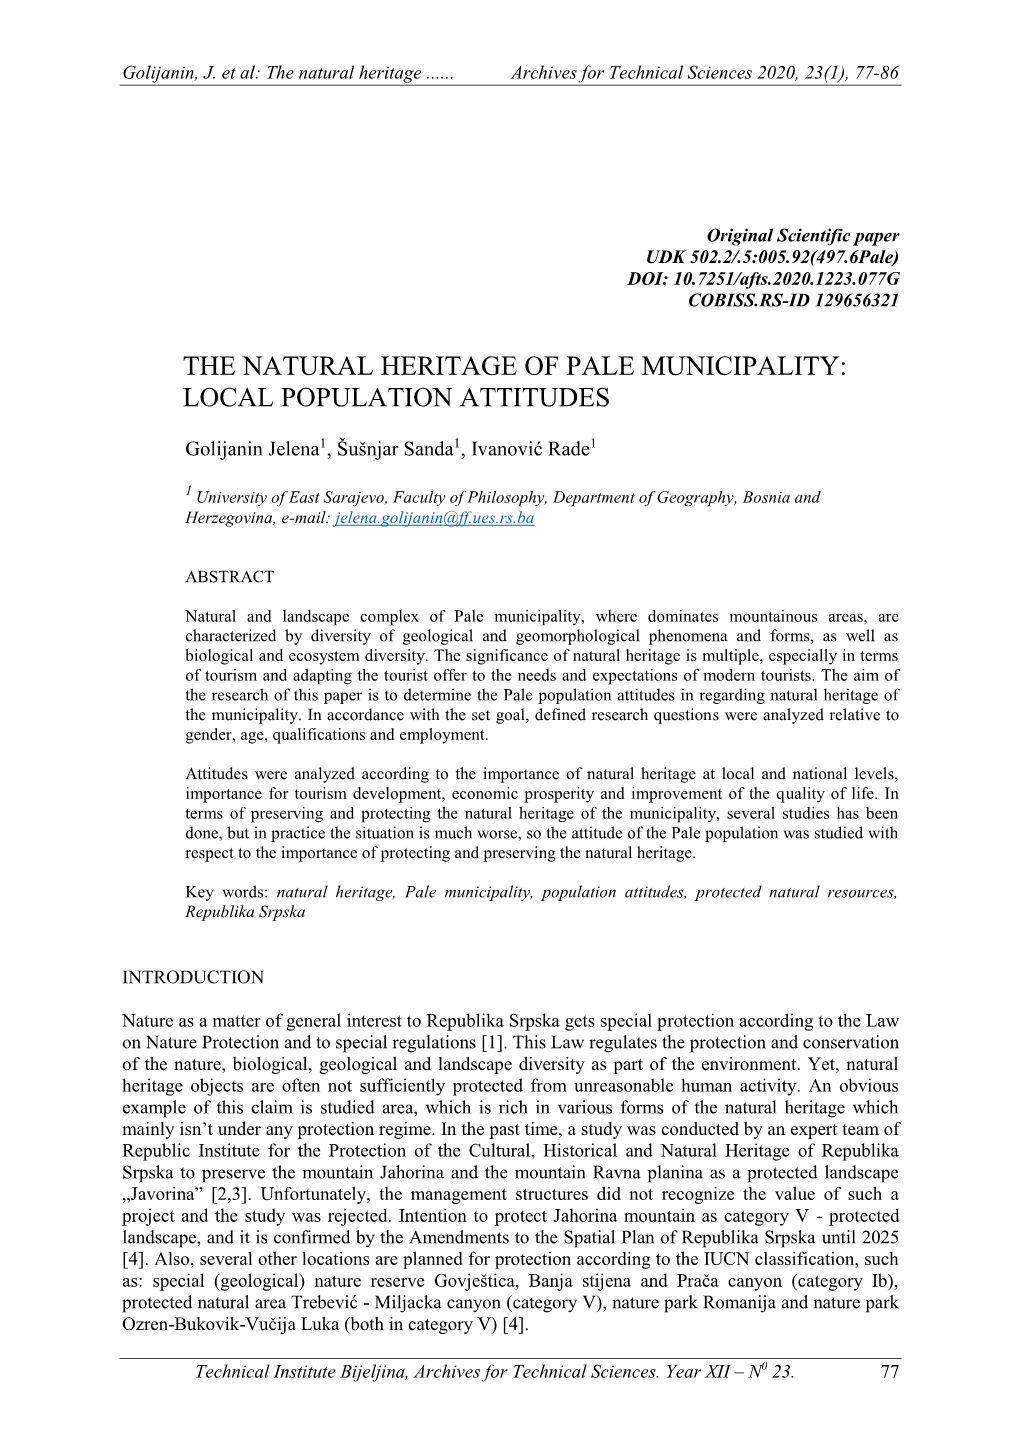 The Natural Heritage of Pale Municipality: Local Population Attitudes